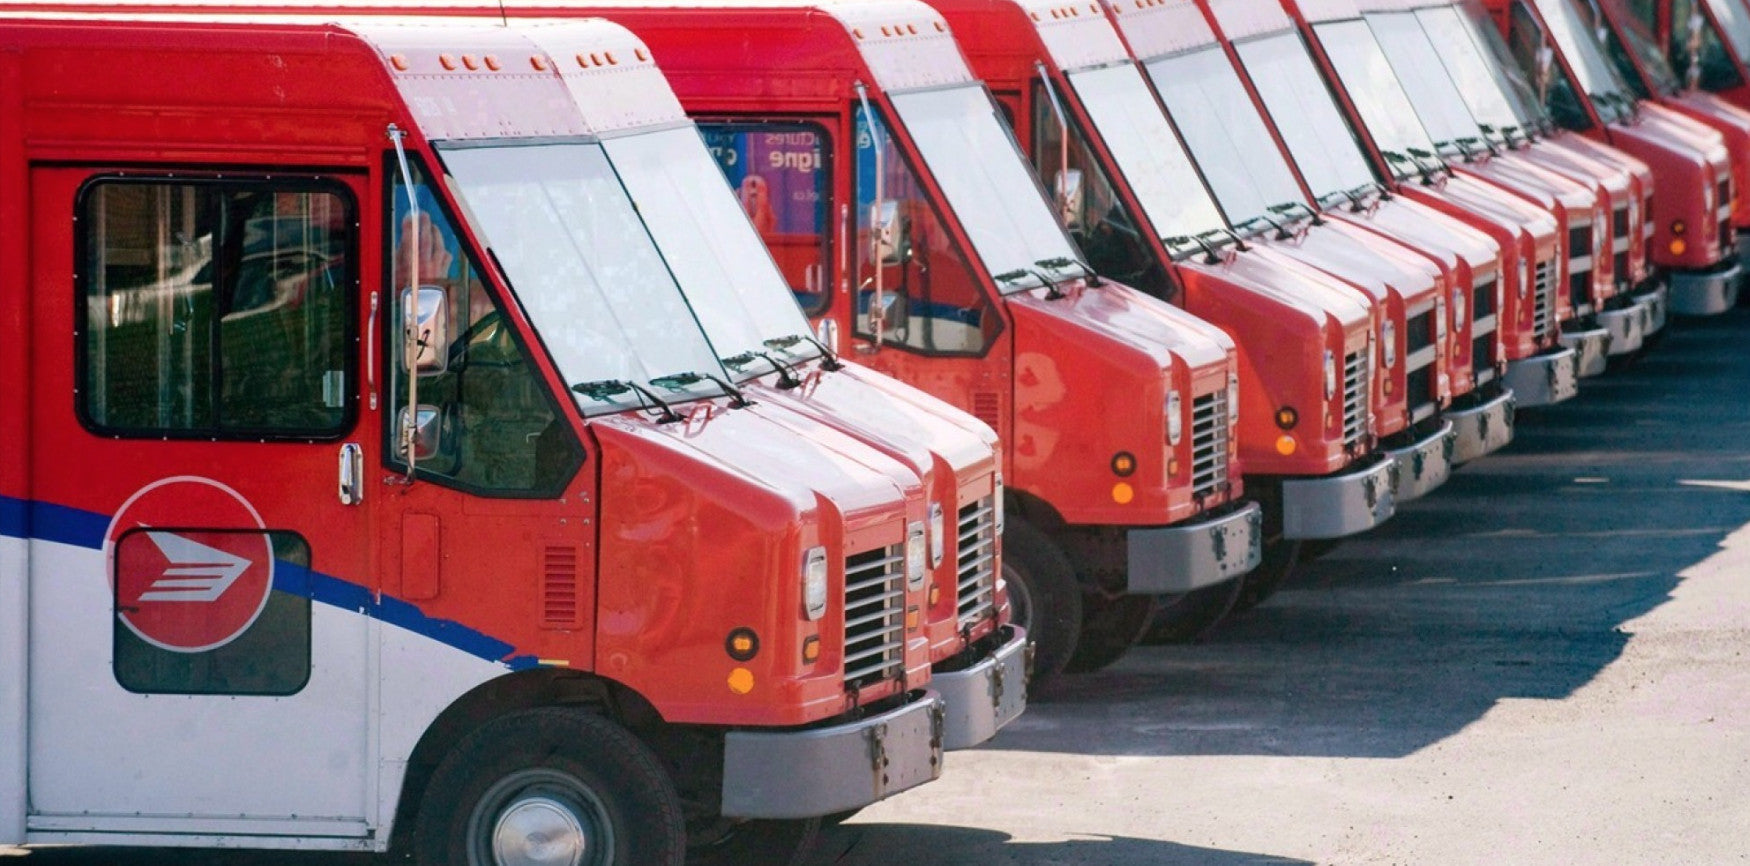 Urgent Message: Possible Canada Post Strike/Lockout